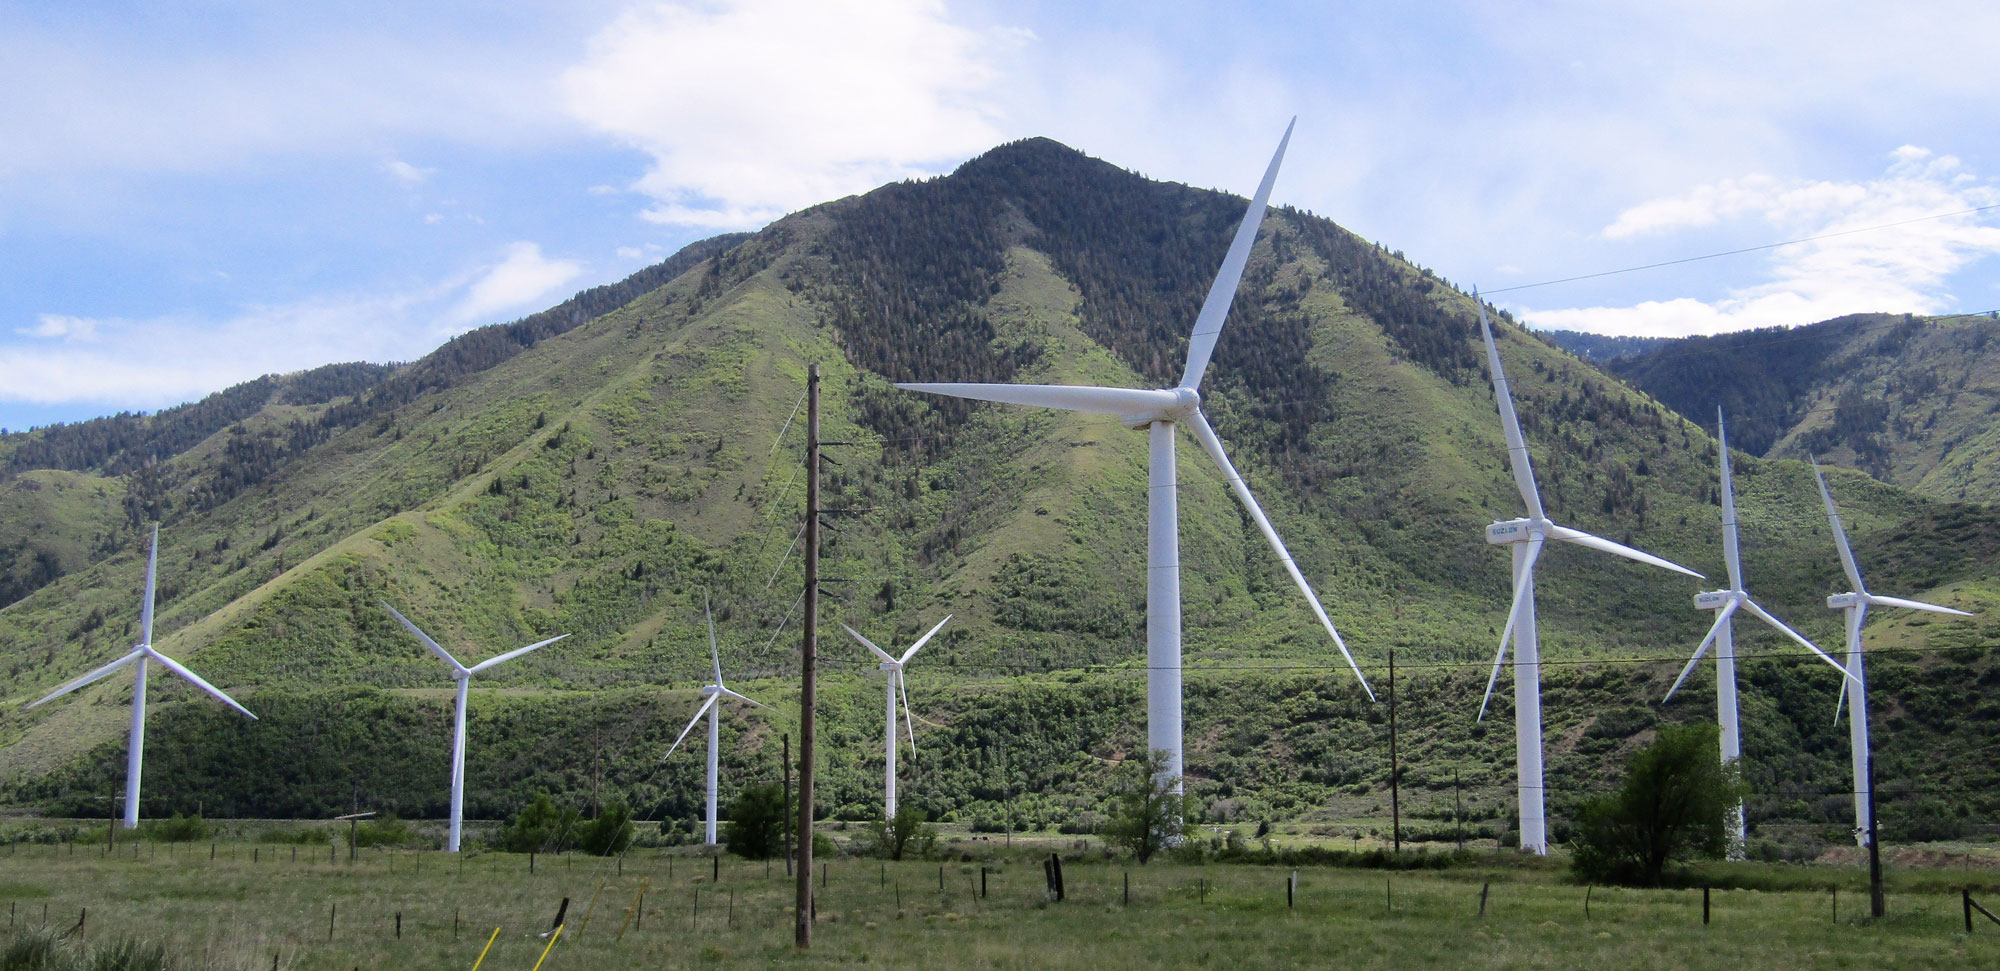 Photograph of a wind farm in Utah. The photo shows eight white wind turbines in a flat field. In the background, a hills rises up being them. The upper summit of the hill is topped with trees, whereas the lower slopes look scrubby.